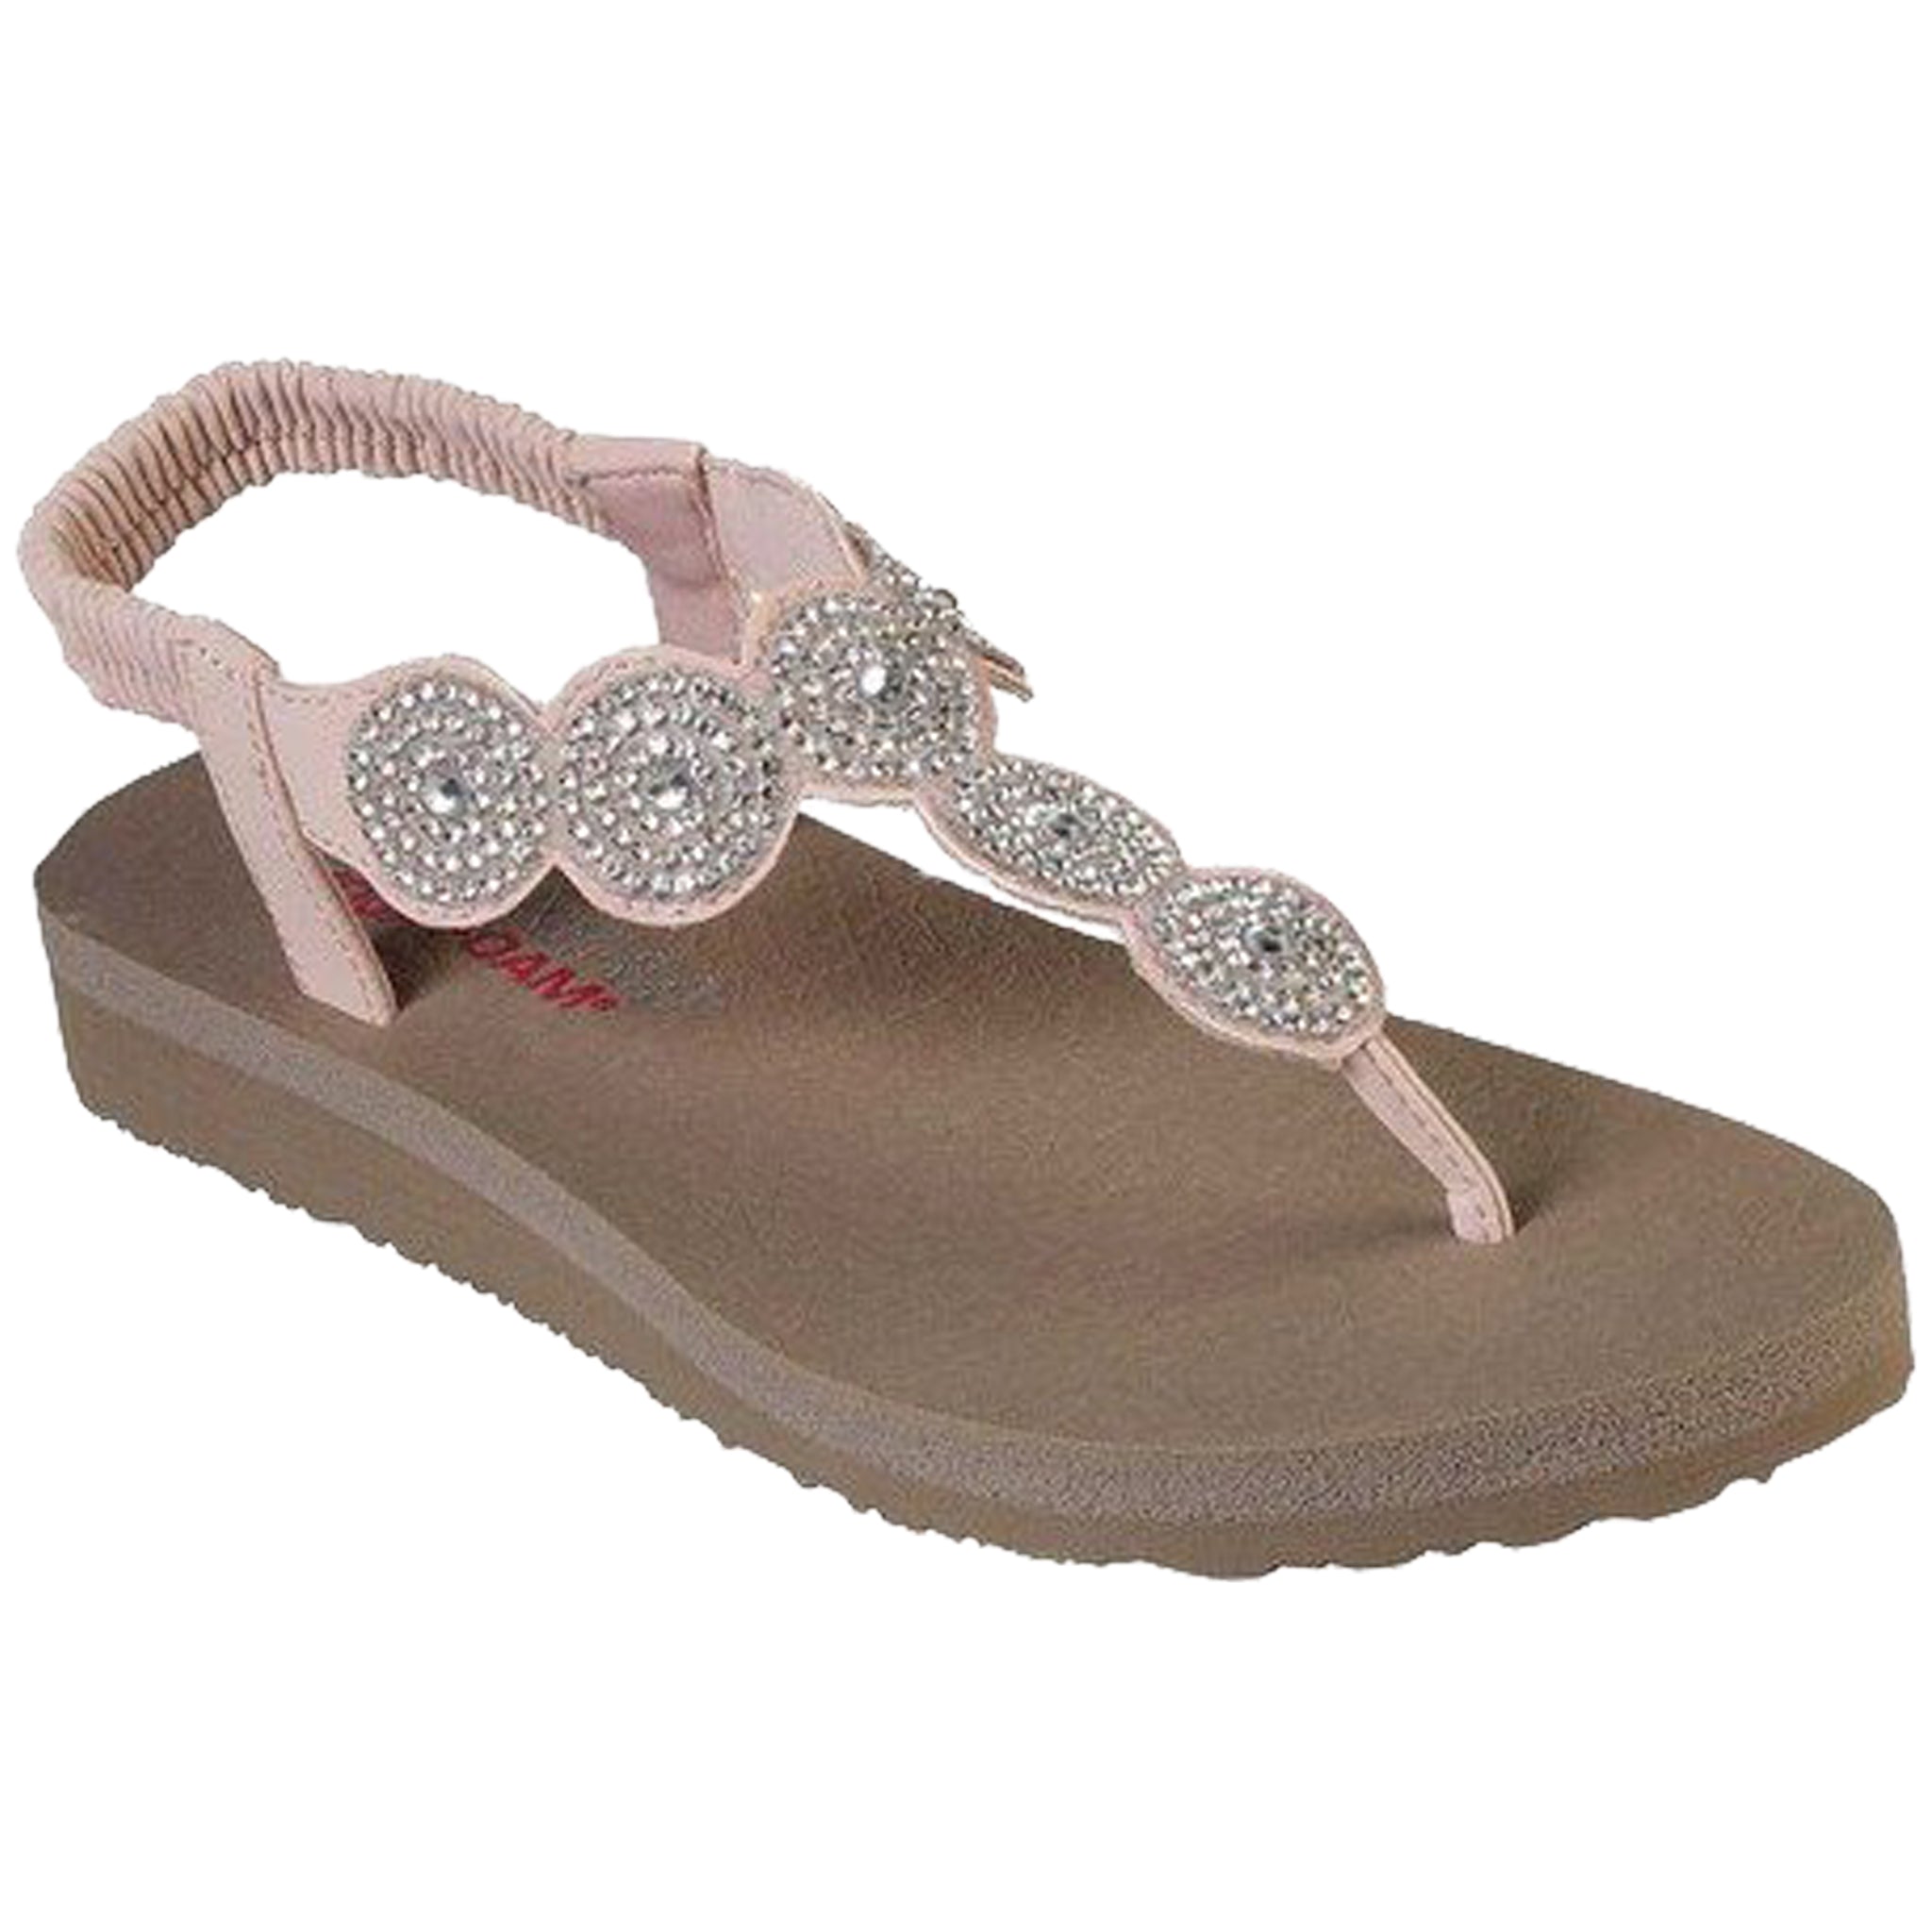 Skechers Women's 31755 Stars Sparkle Yoga Foam Thong – That Shoe Store and More